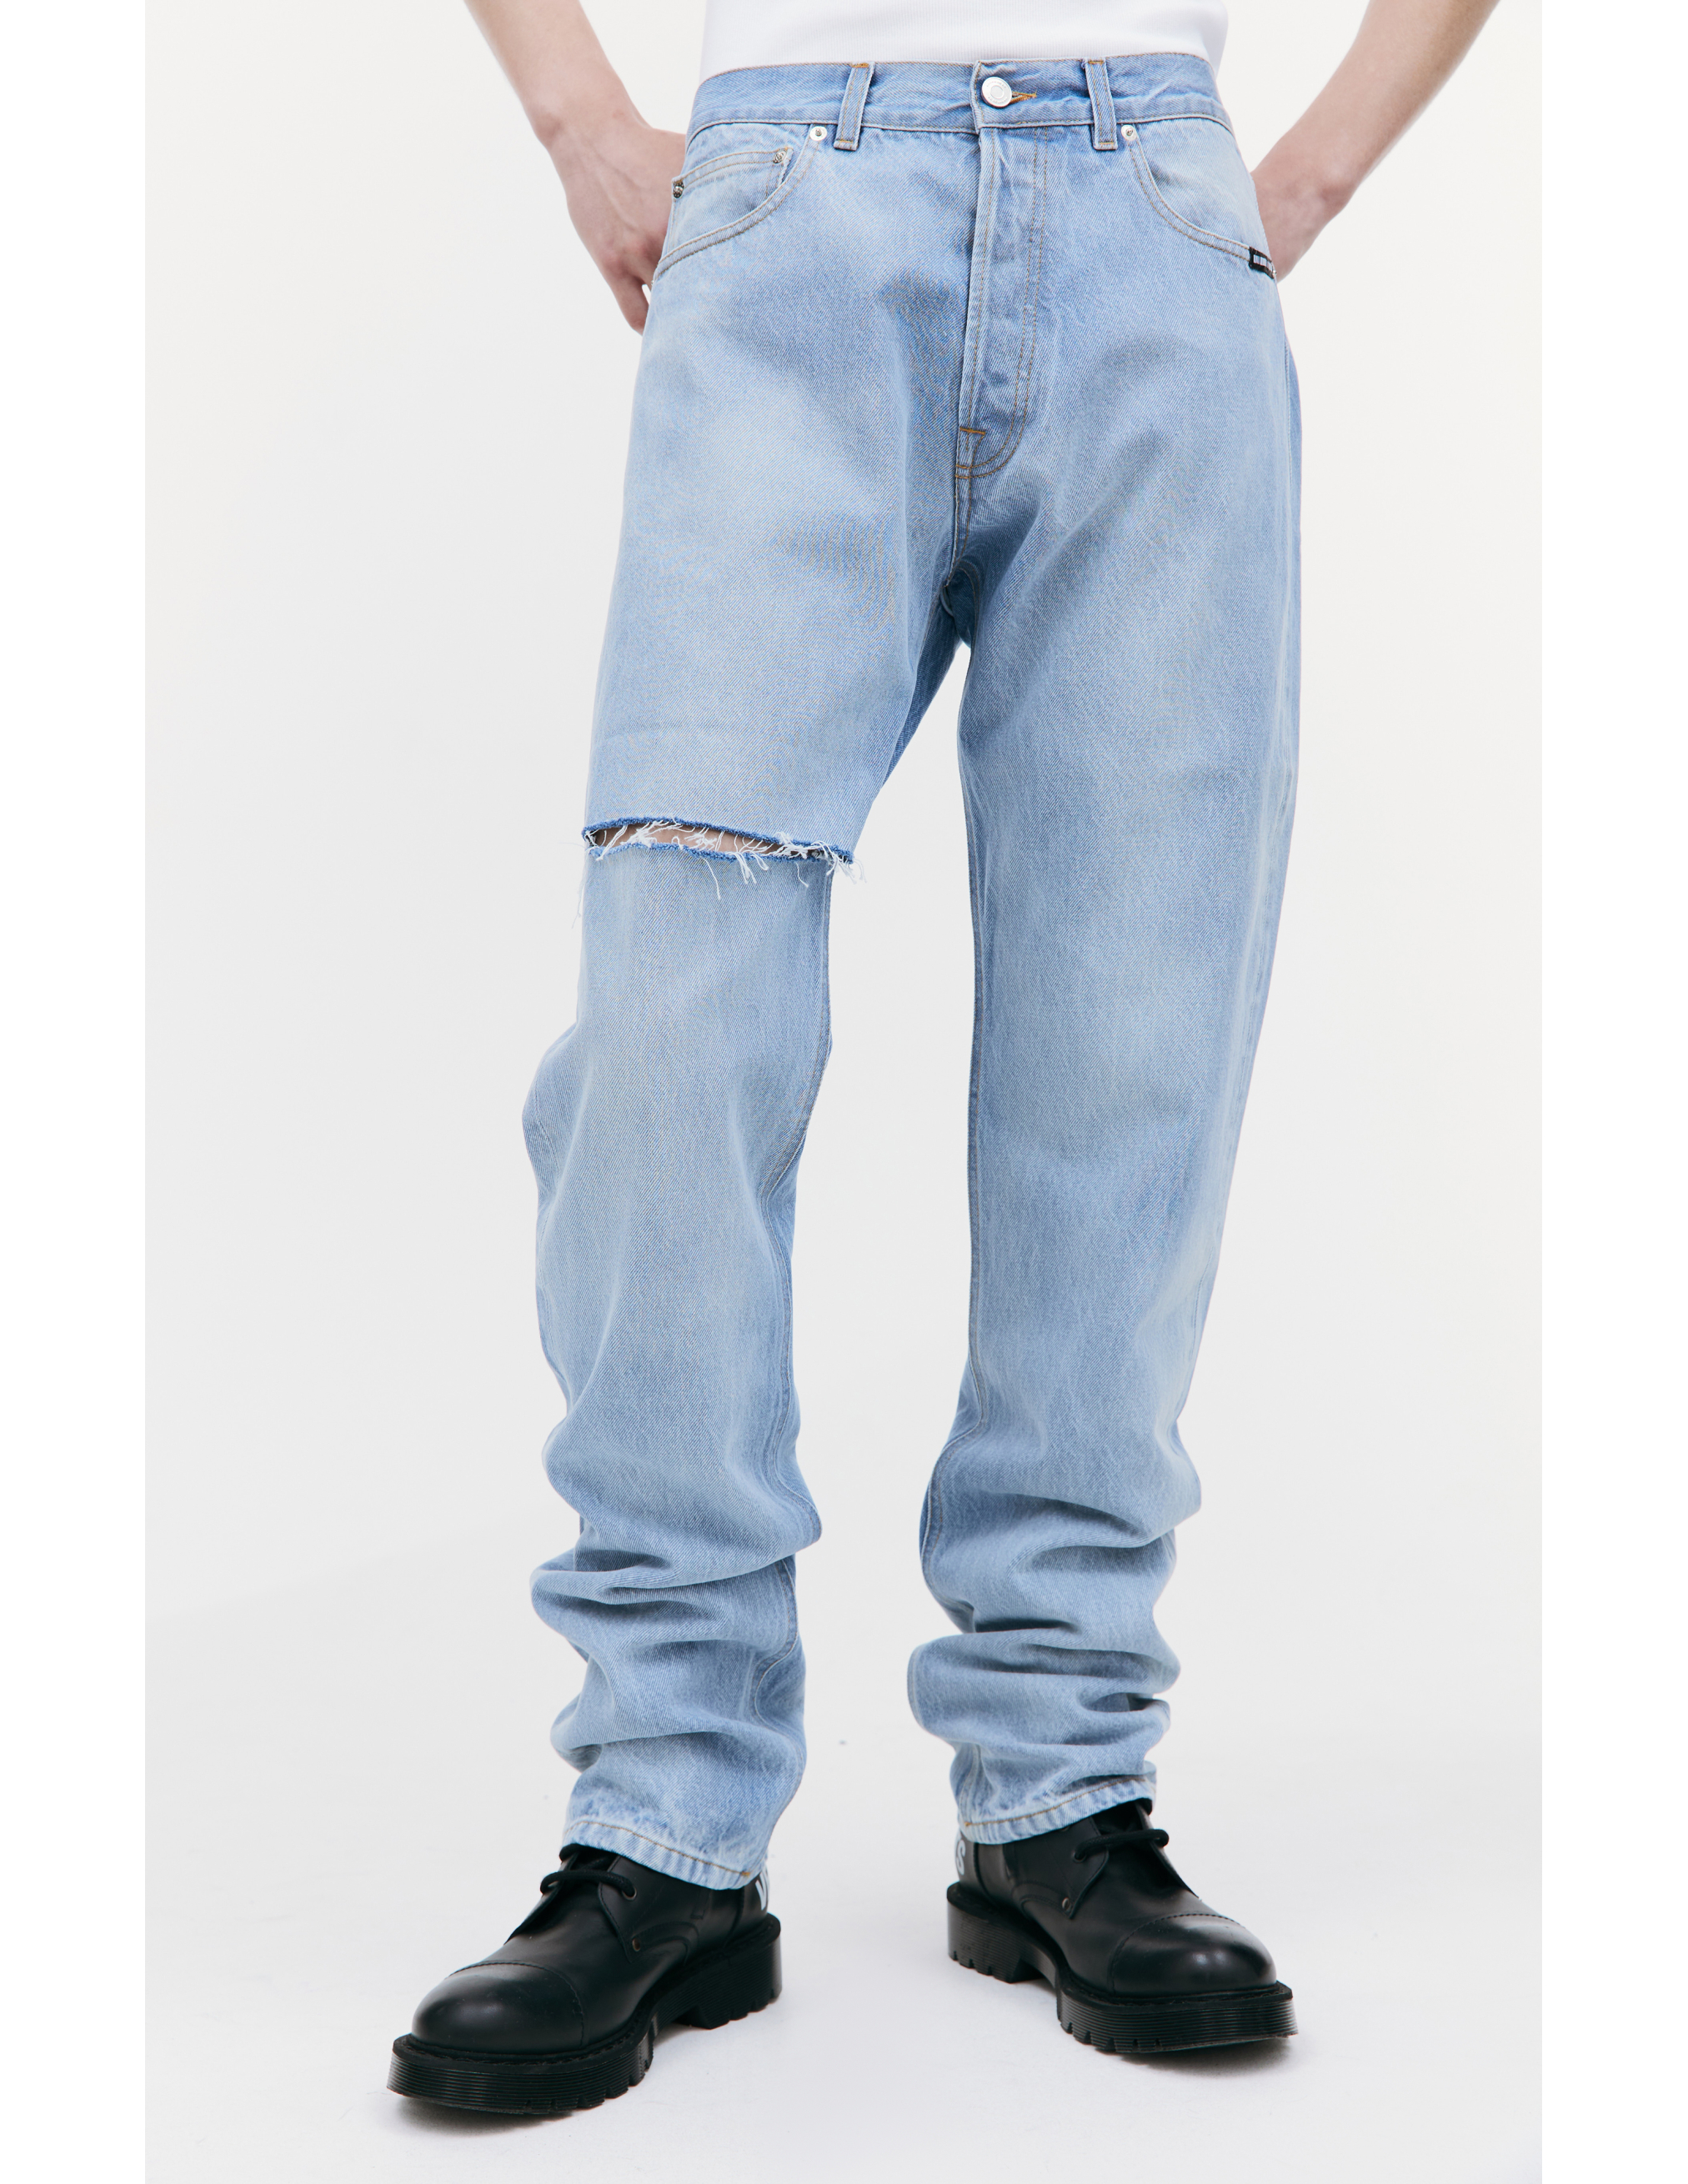 Shop Vtmnts Blue Ripped Jeans